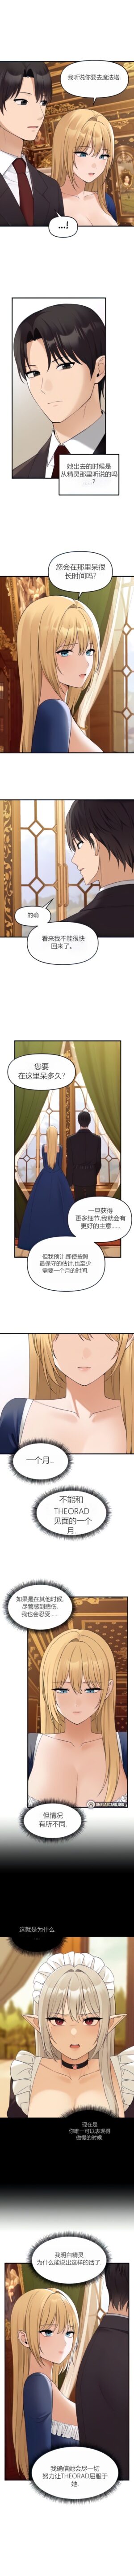 Elf Who Likes to be Humiliated Chapters 70-73 [Chinese][Ai识别机翻]